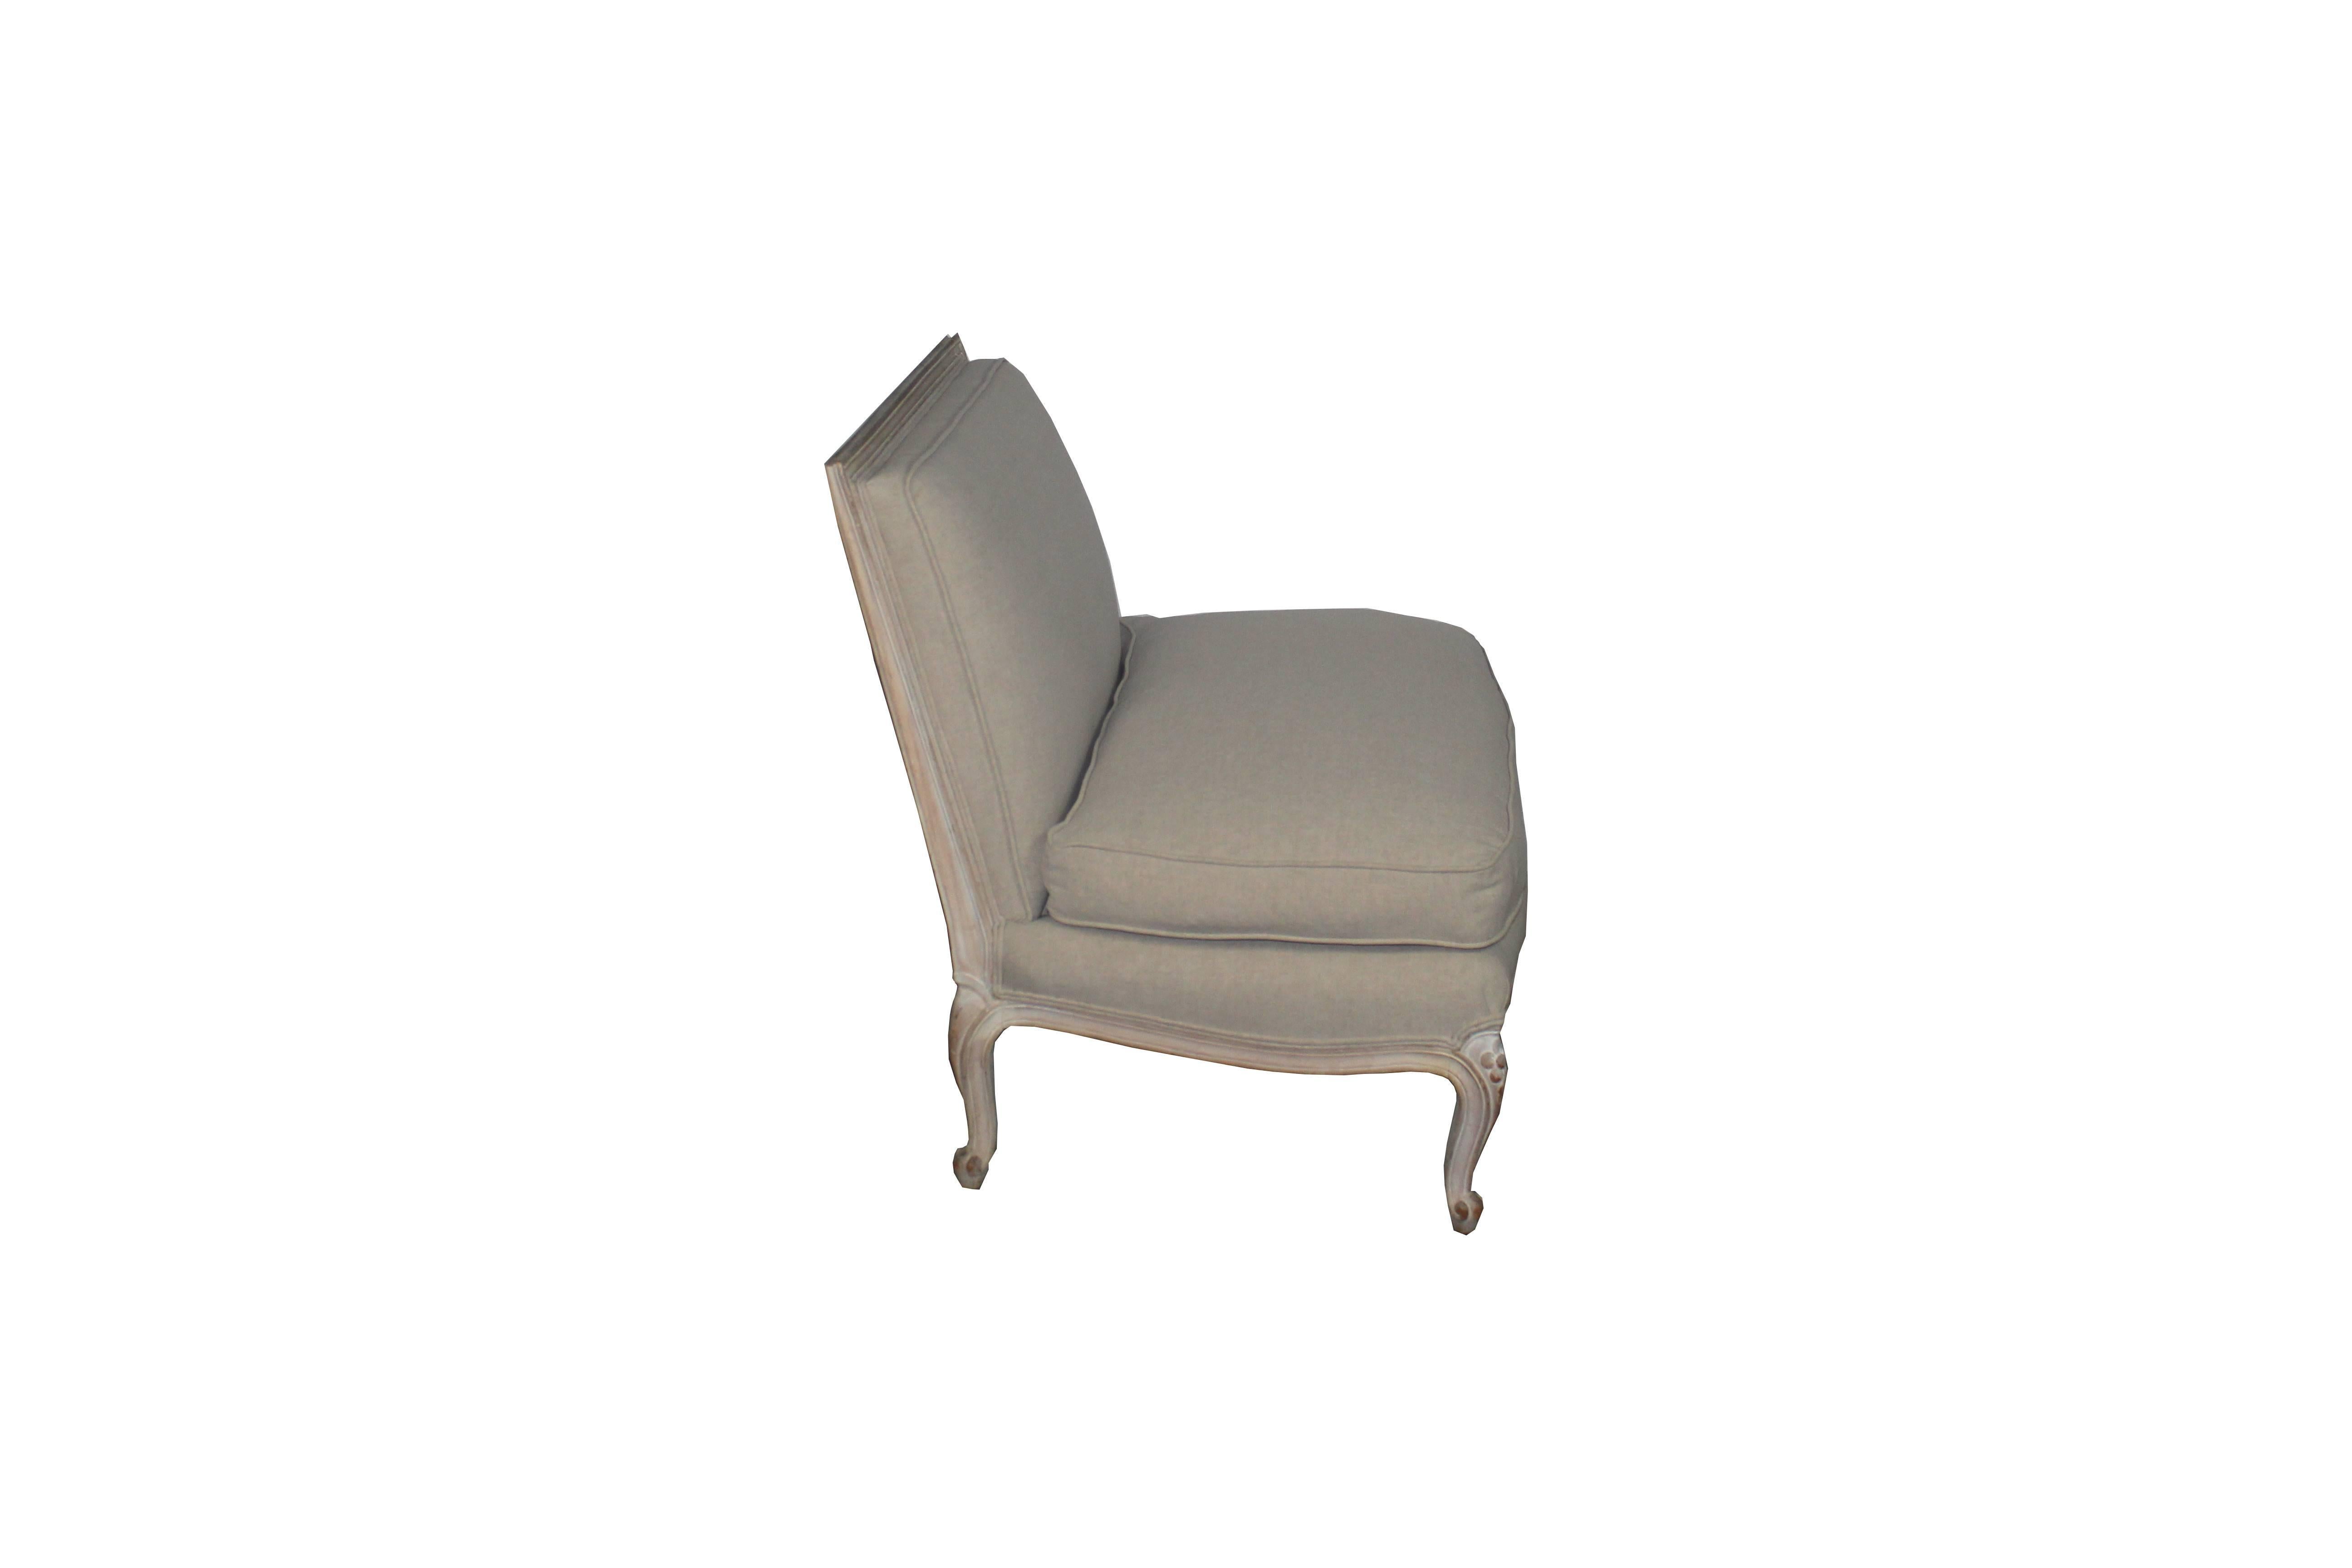 Louis XV style chairs with wide seat and square back. Newly upholstered in light gray linen.